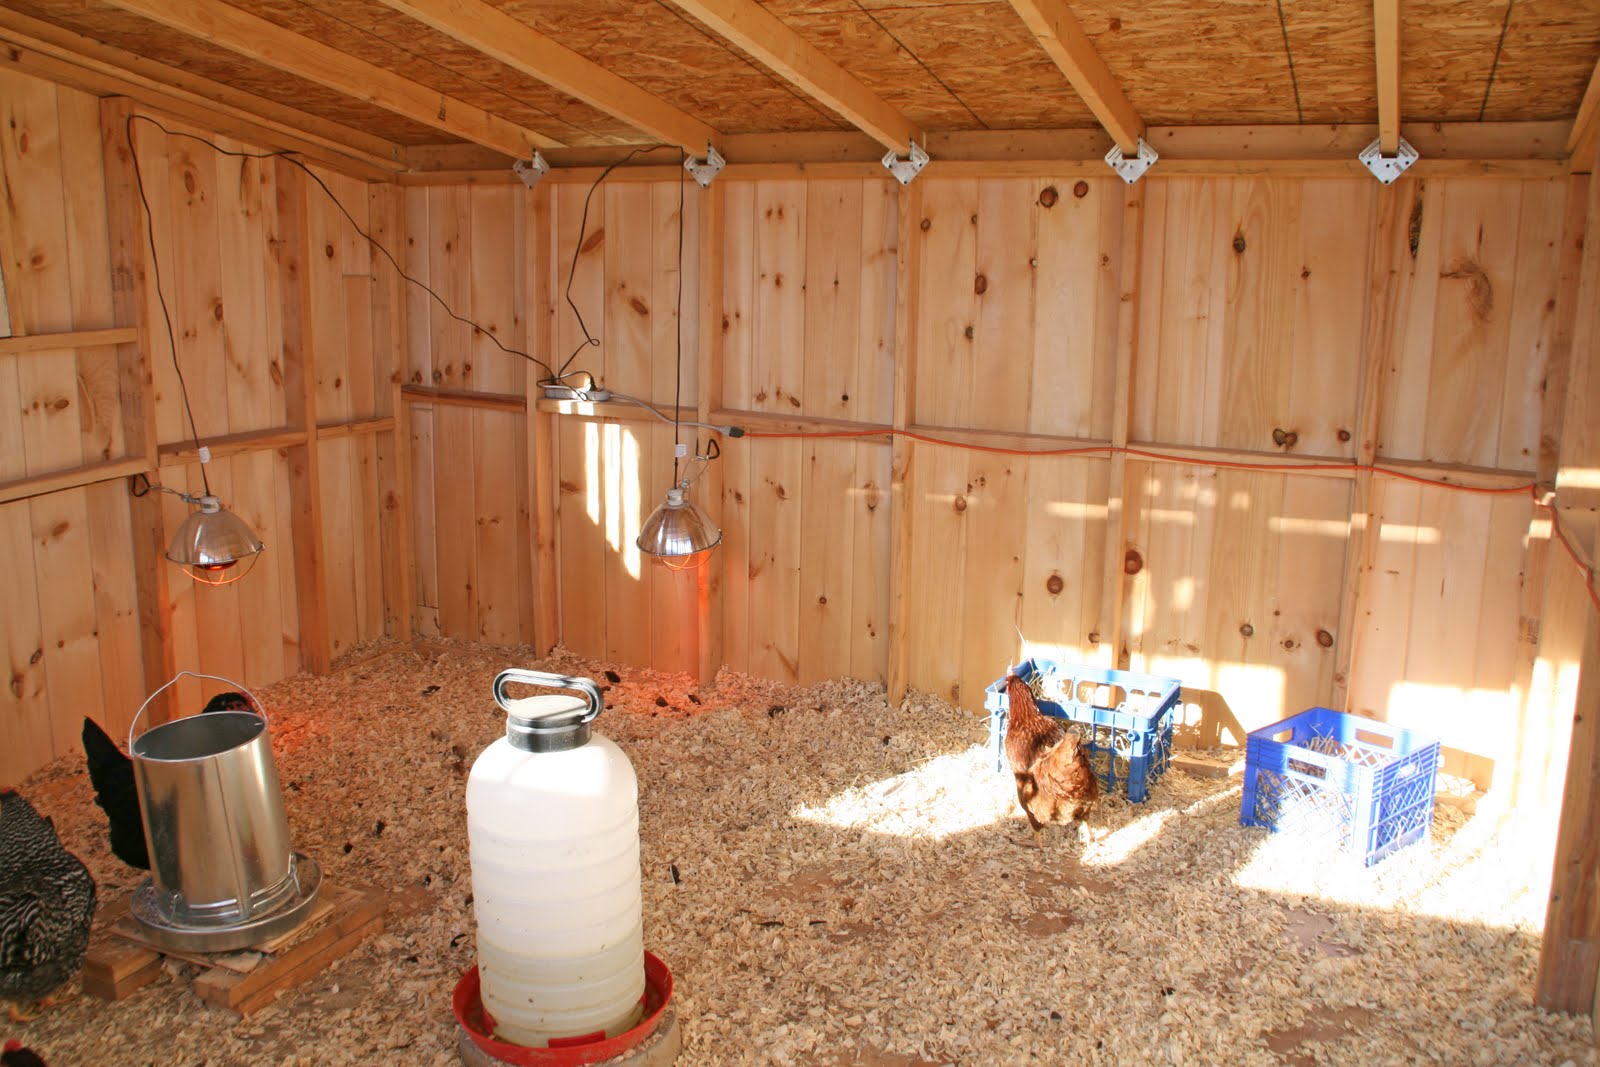 Get how to build chicken coop and run